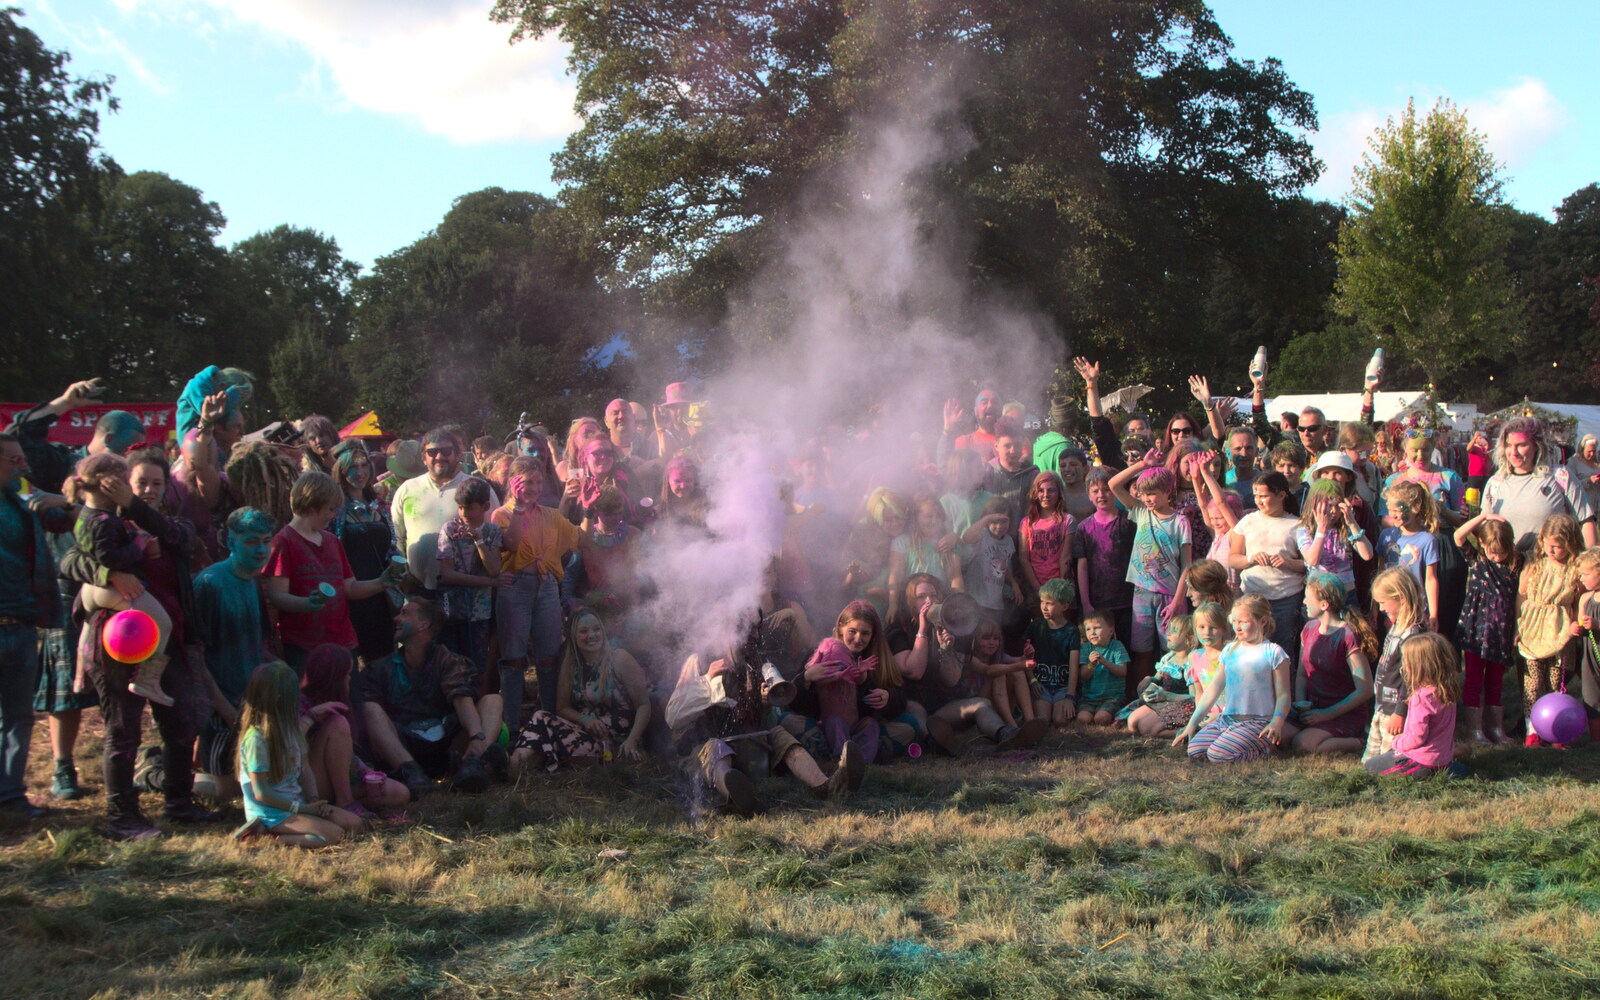 A post-paint-fight group photo from Maui Waui Festival, Hill Farm, Gressenhall, Norfolk - 28th August 2021